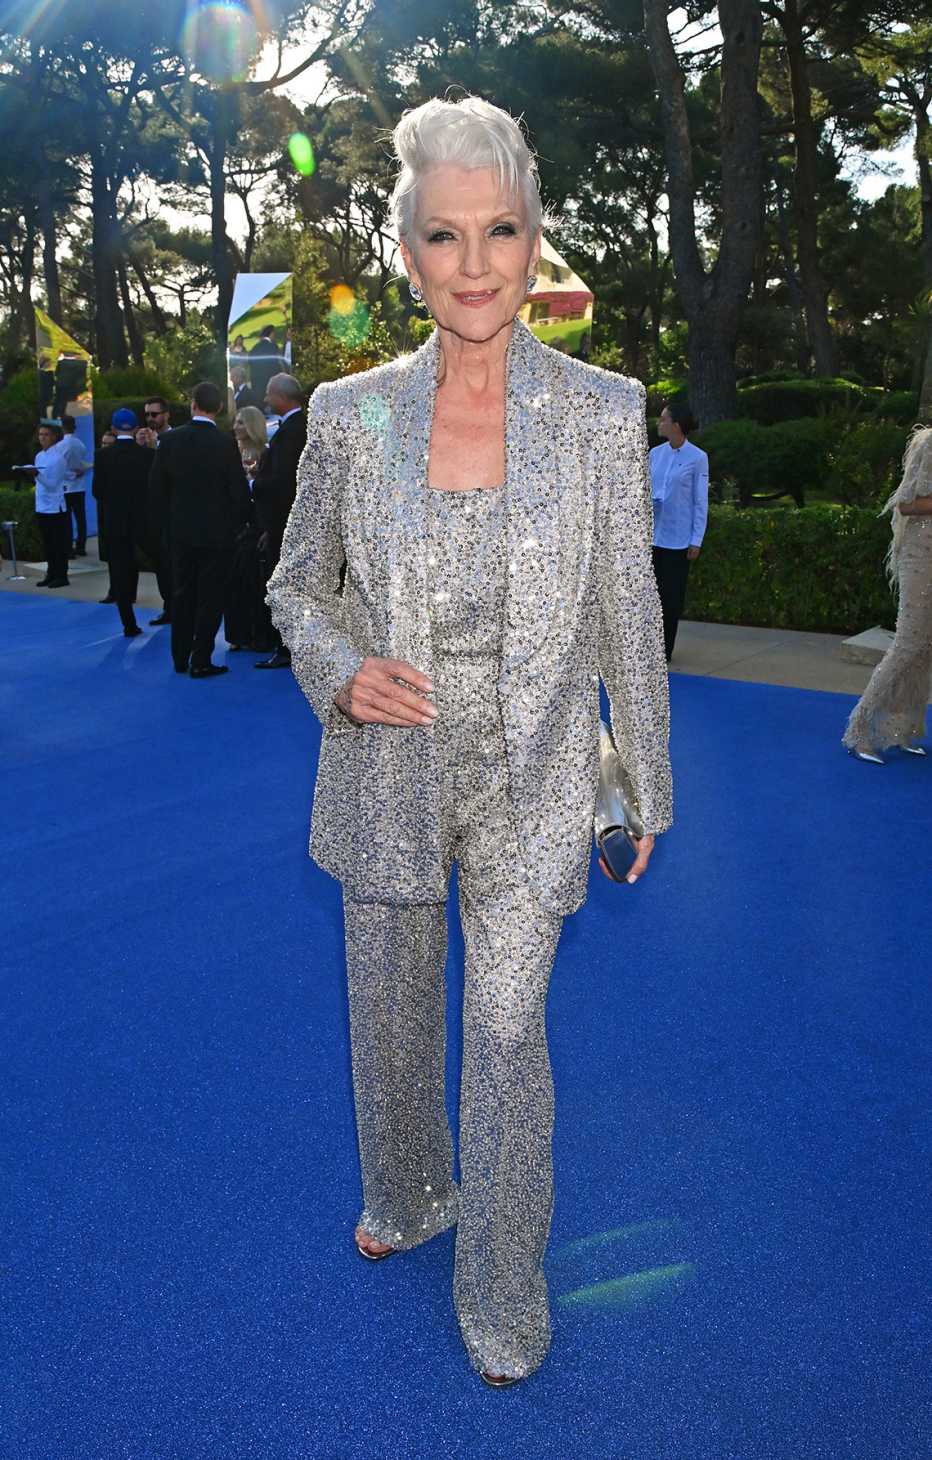 Maye Musk wearing a silver-sequined suit at the amfAR Cannes Gala 2023